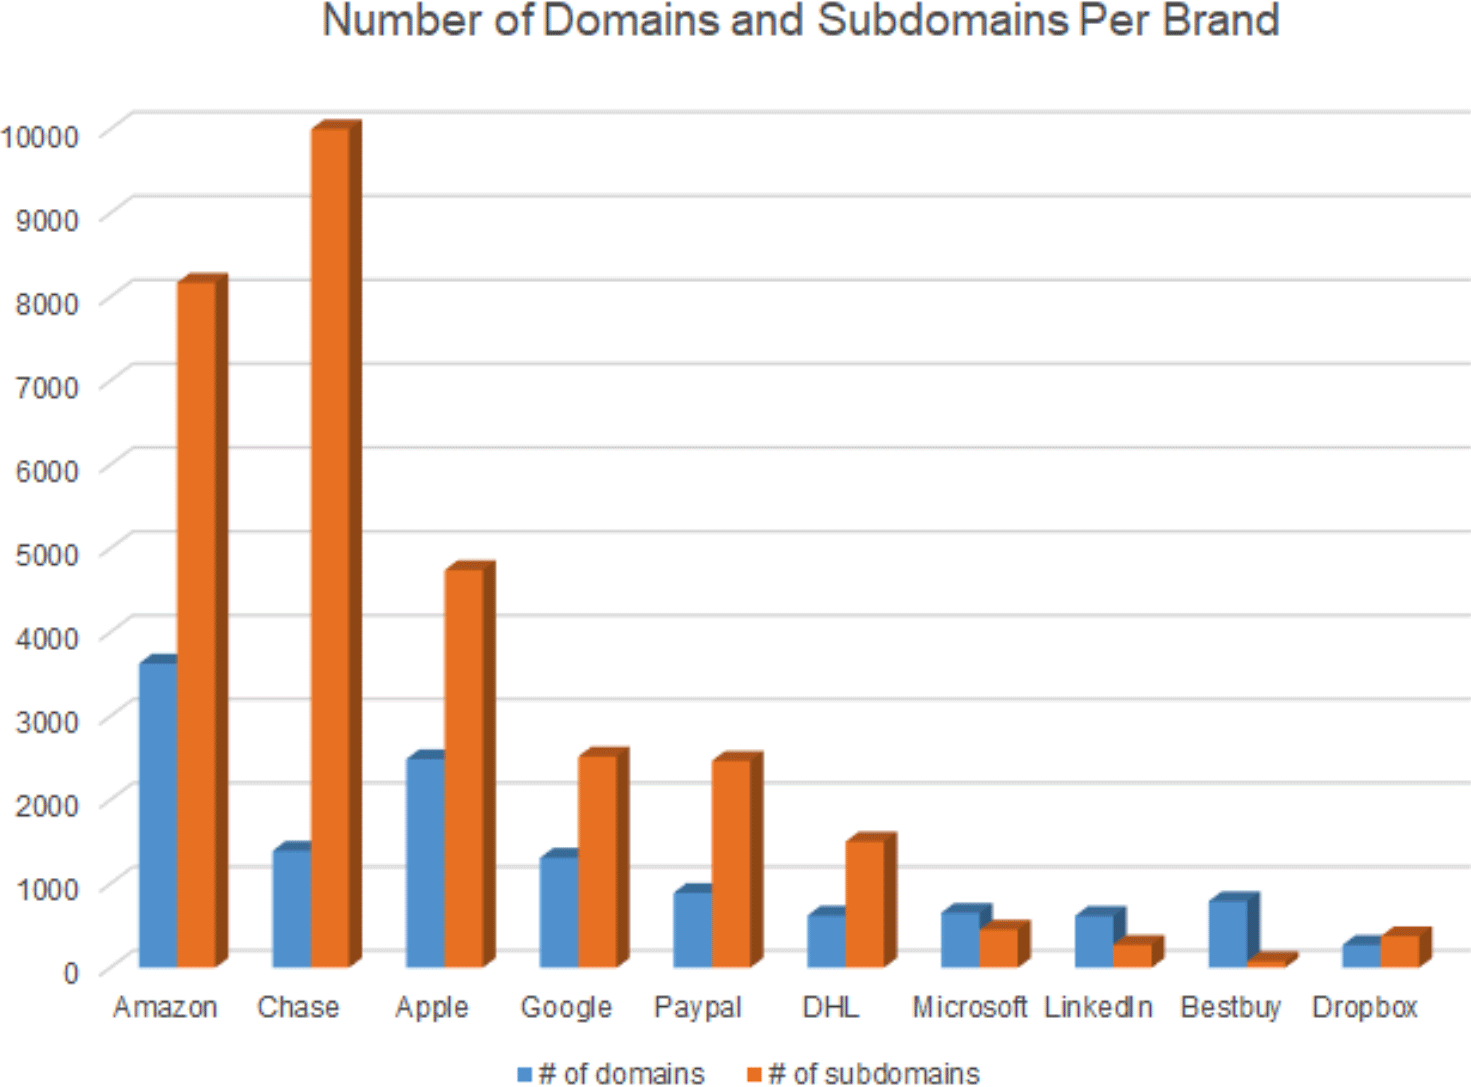 Q2 2021 Top 10 Most Impersonated Brands in Domains 16